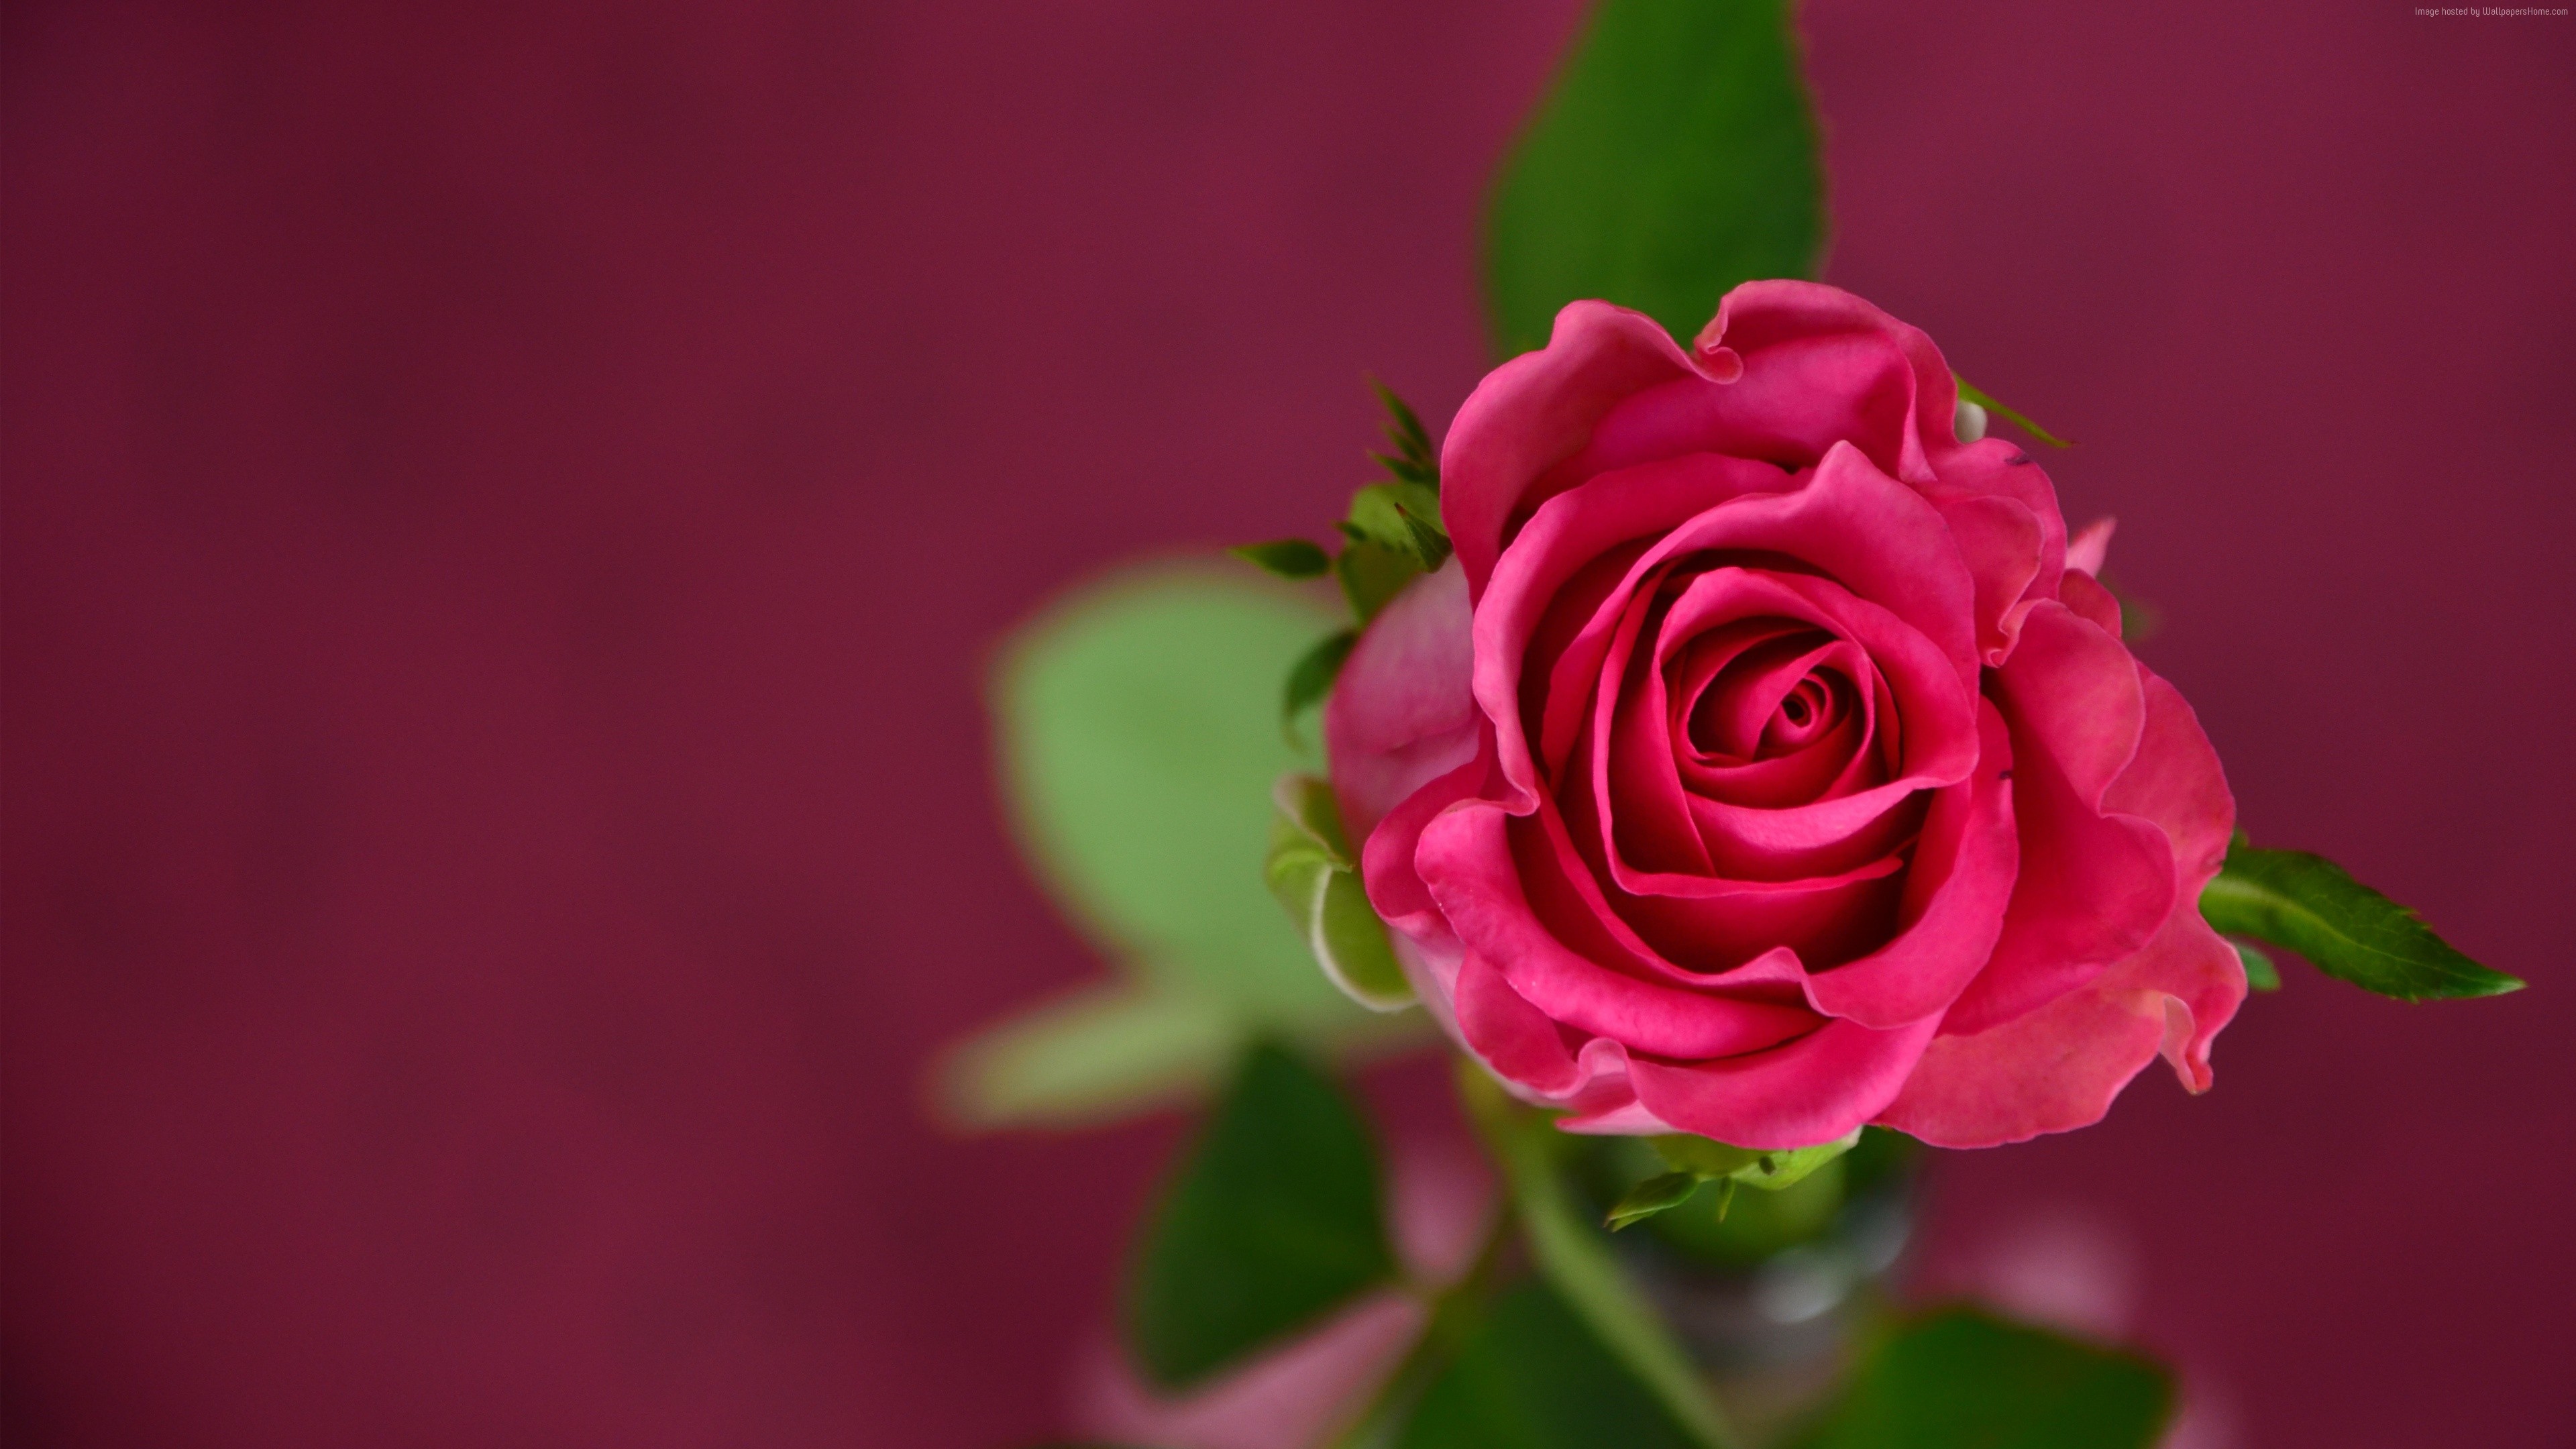 Rose 4k, HD Flowers, 4k Wallpapers, Images, Backgrounds, Photos and Pictures